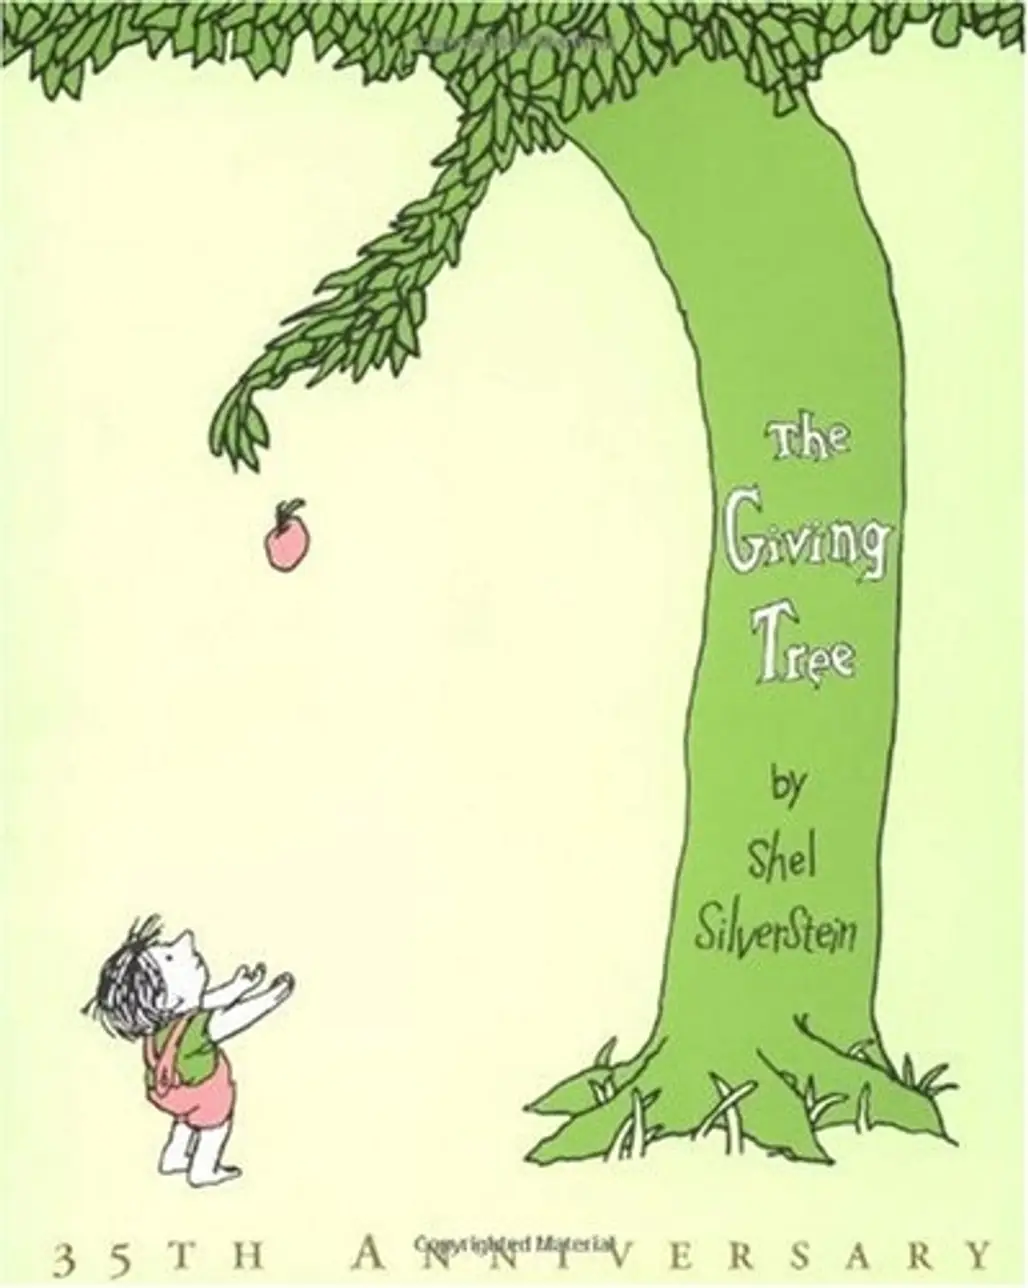 The Giving Tree from Shel Silverstein